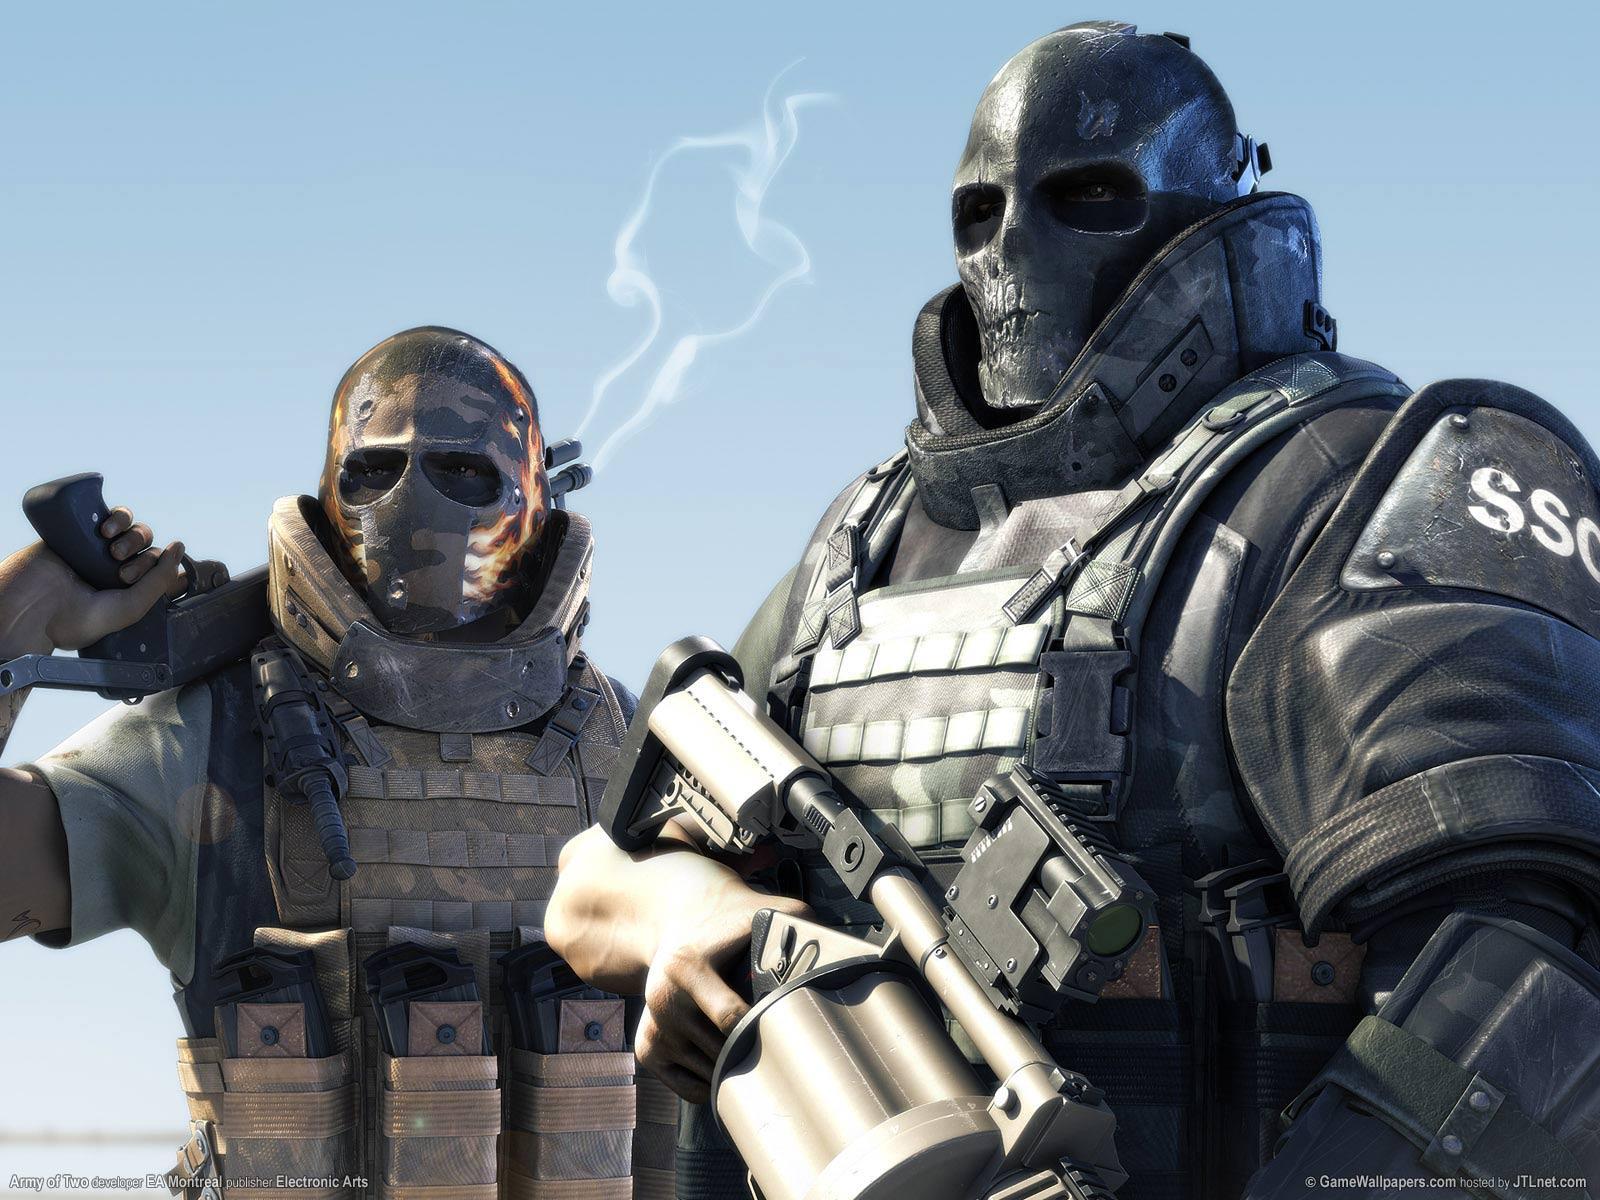 Desktop Wallpaper · Gallery · Games · Army of two. Free